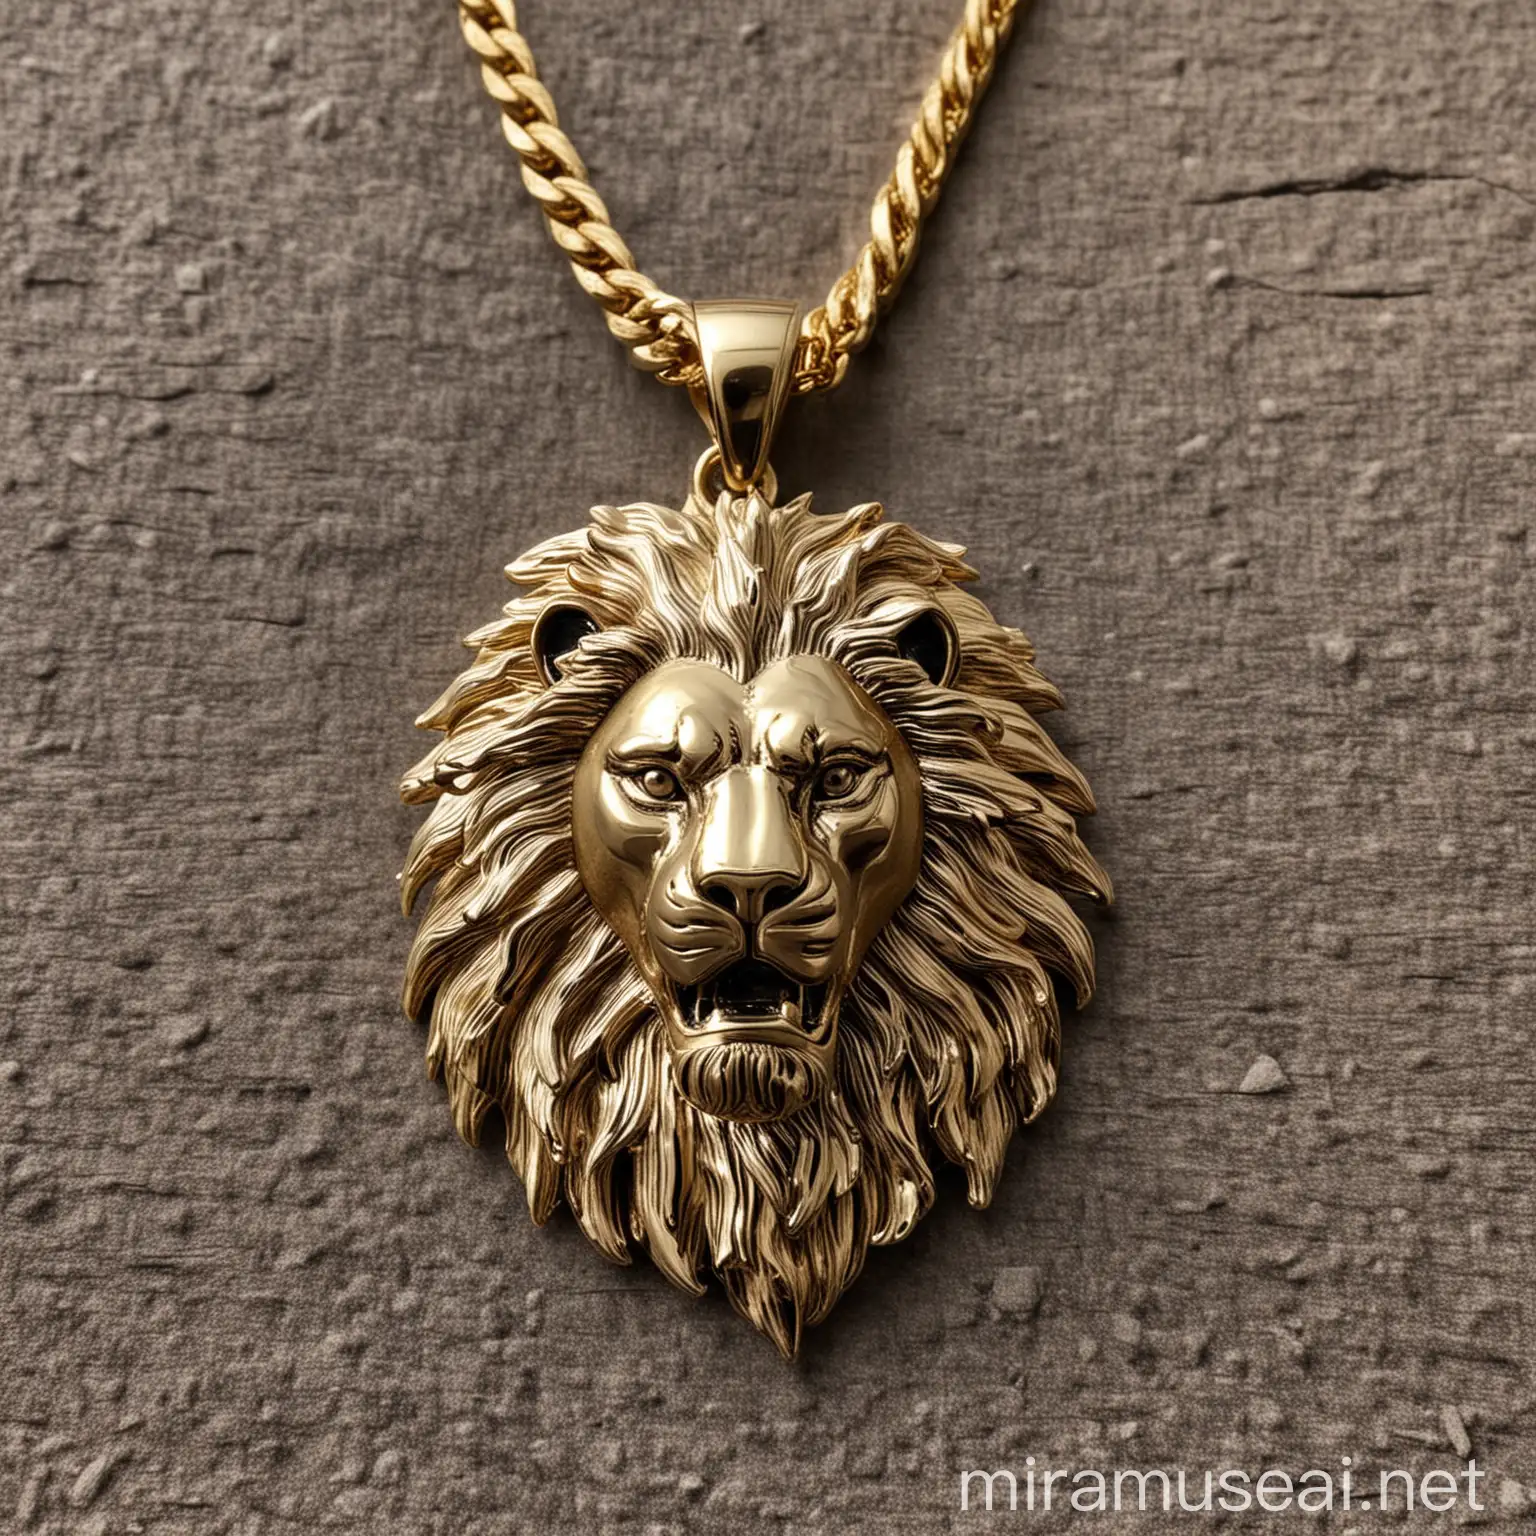 Lion and Tiger Pendant Symbol of Resilience and Power in HipHop Jewelry